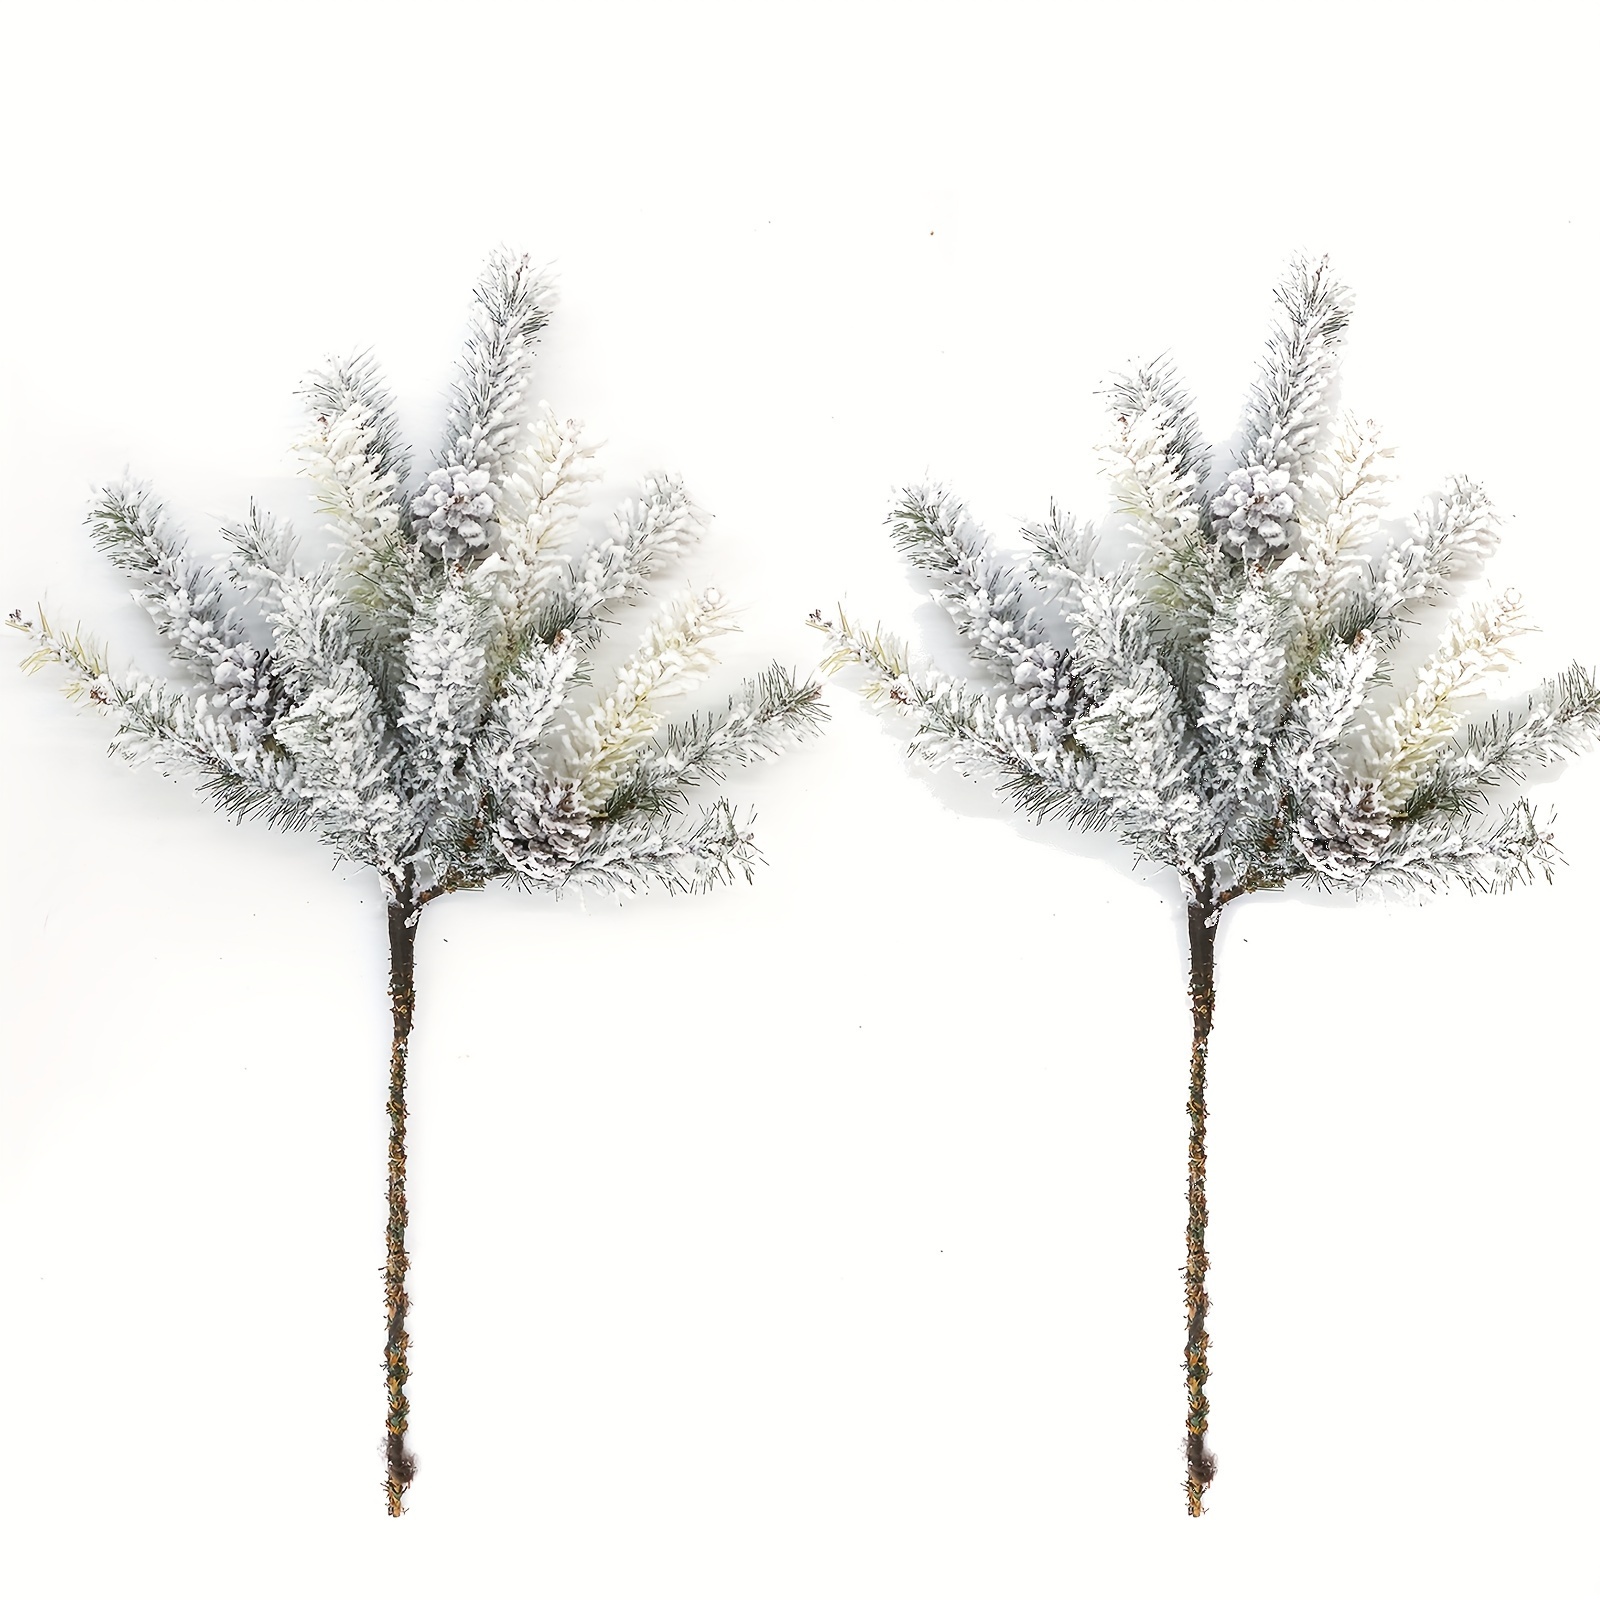 Viryfite 20 Pcs Christmas Artificial Pine Needles Branches 10Inch  Artificial Snowy Pine Branches Faux Pine Picks Twigs Frosted Flocked Pine  Picks for